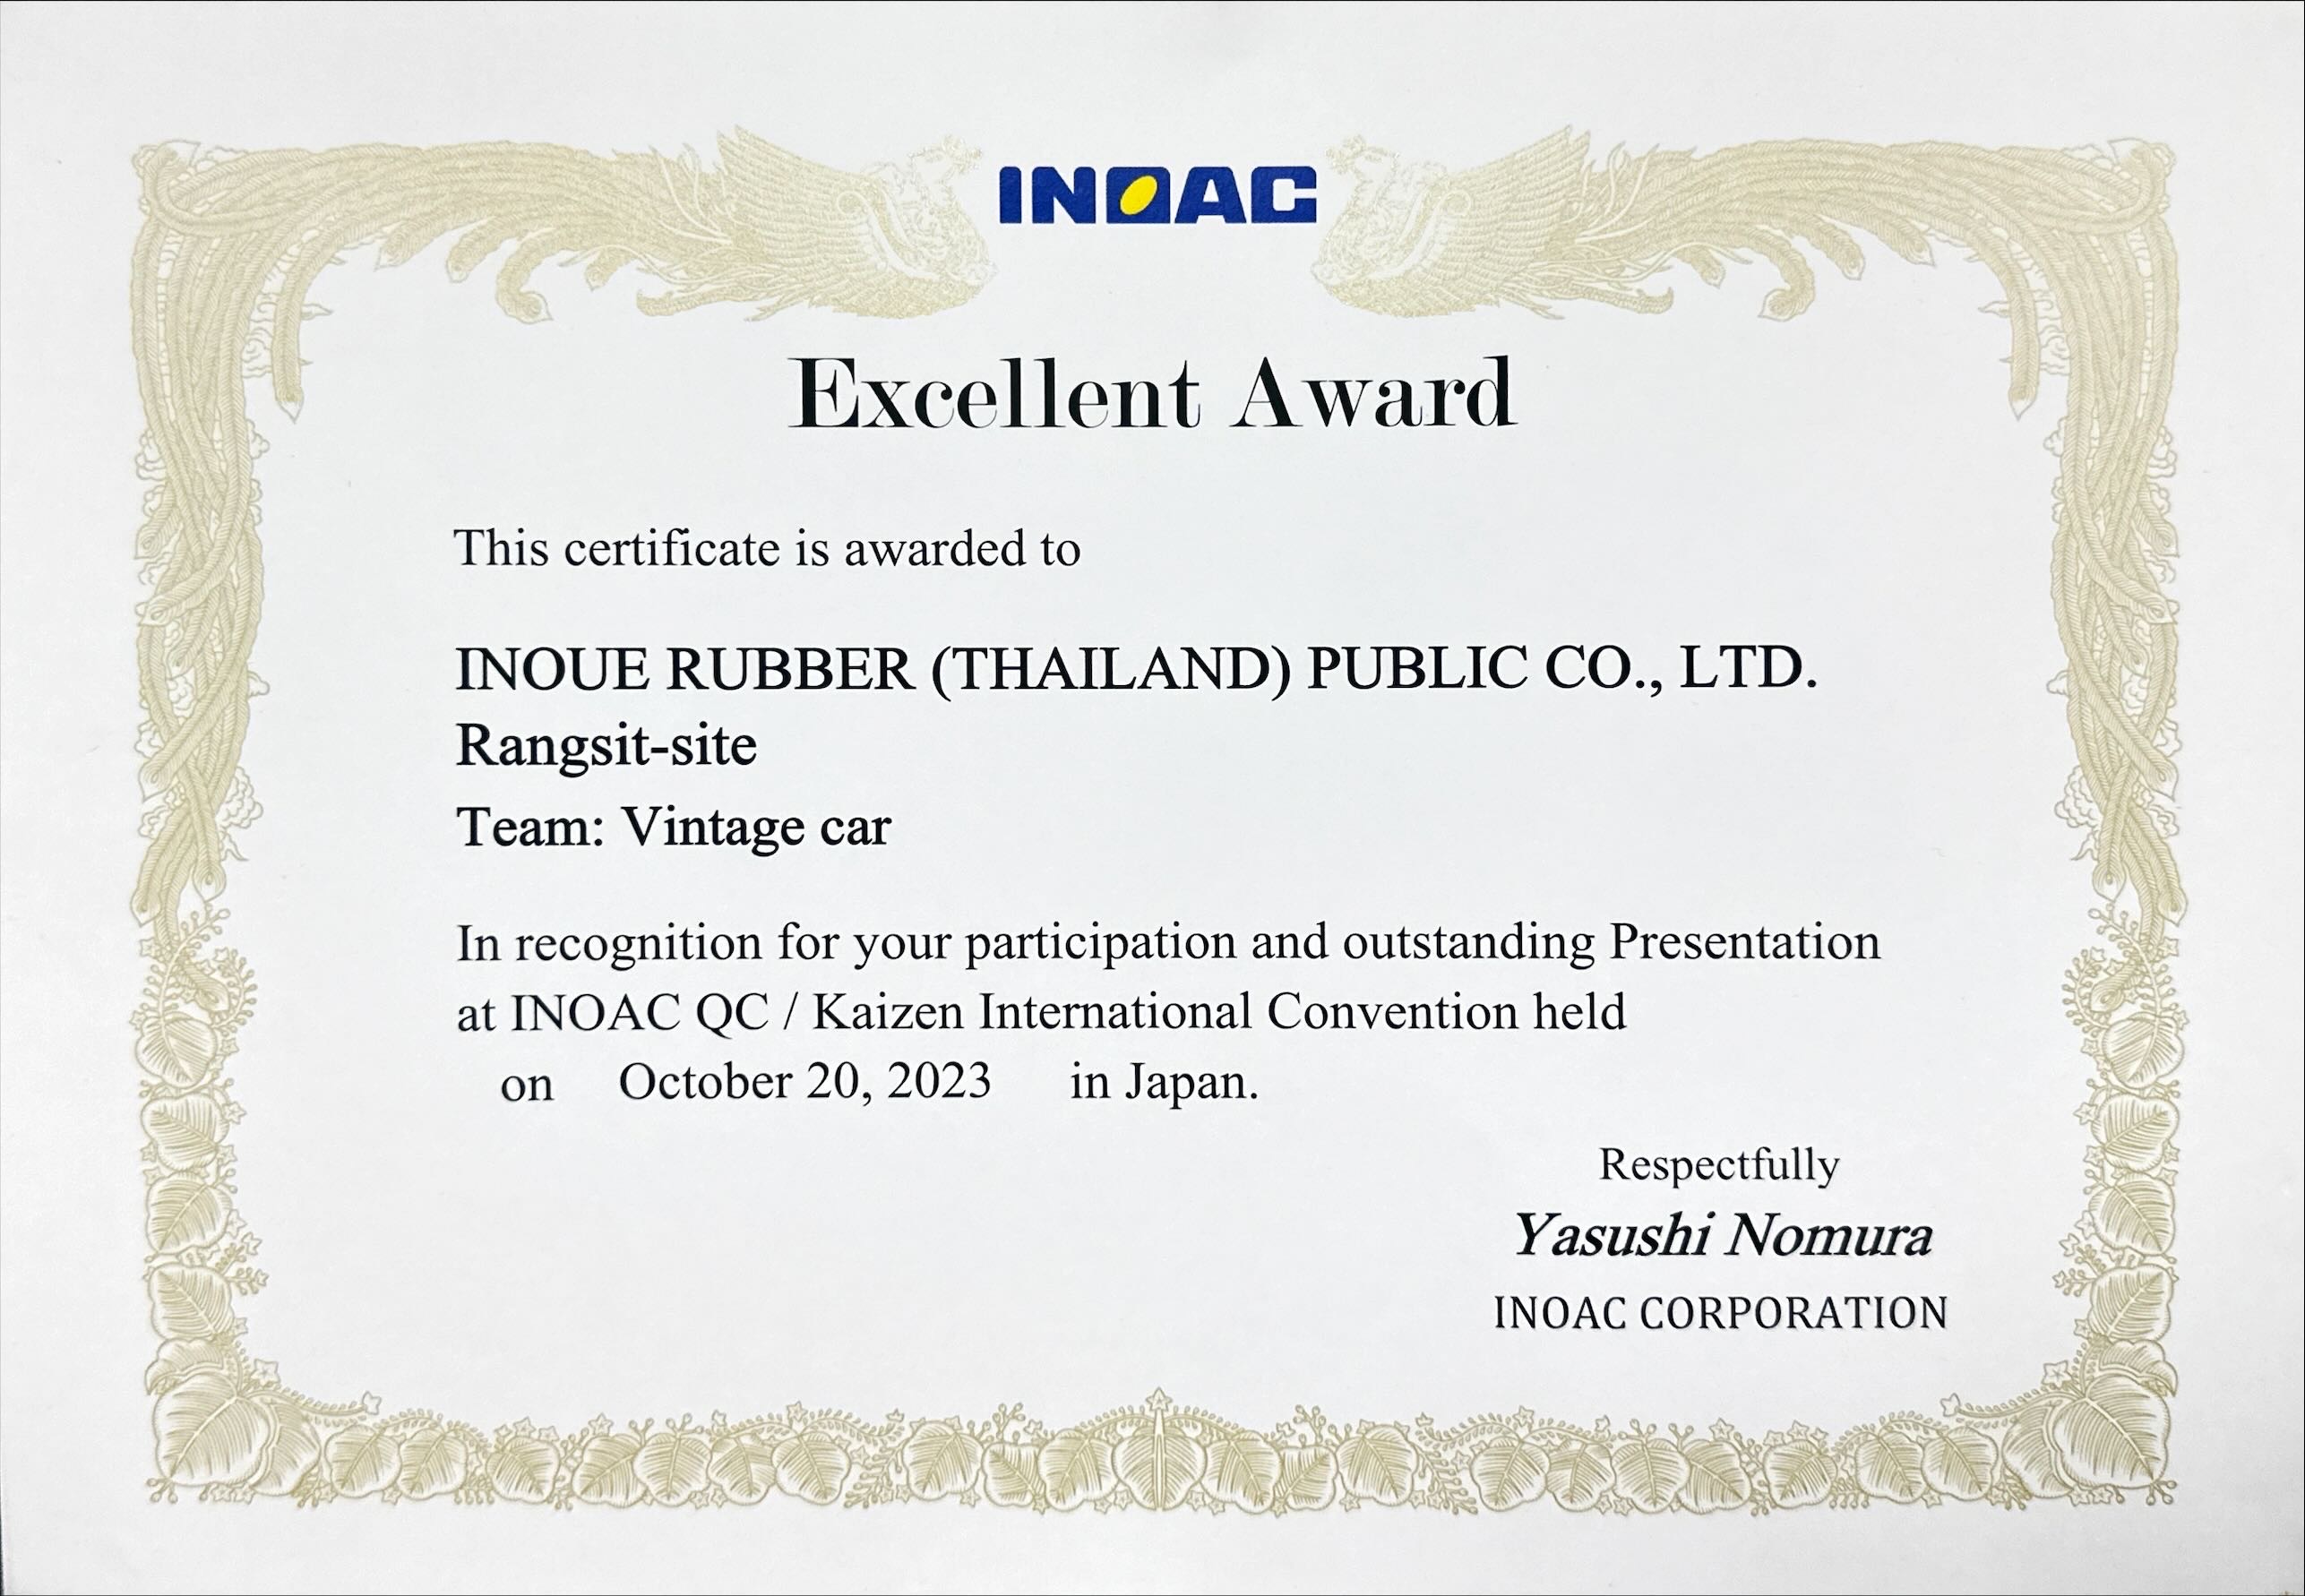 IRC won "Excellent Award” from the QCC/KAIZEN presentation at INOAC QC-KAIZEN INTERNATIONAL CONVENTION in Japan